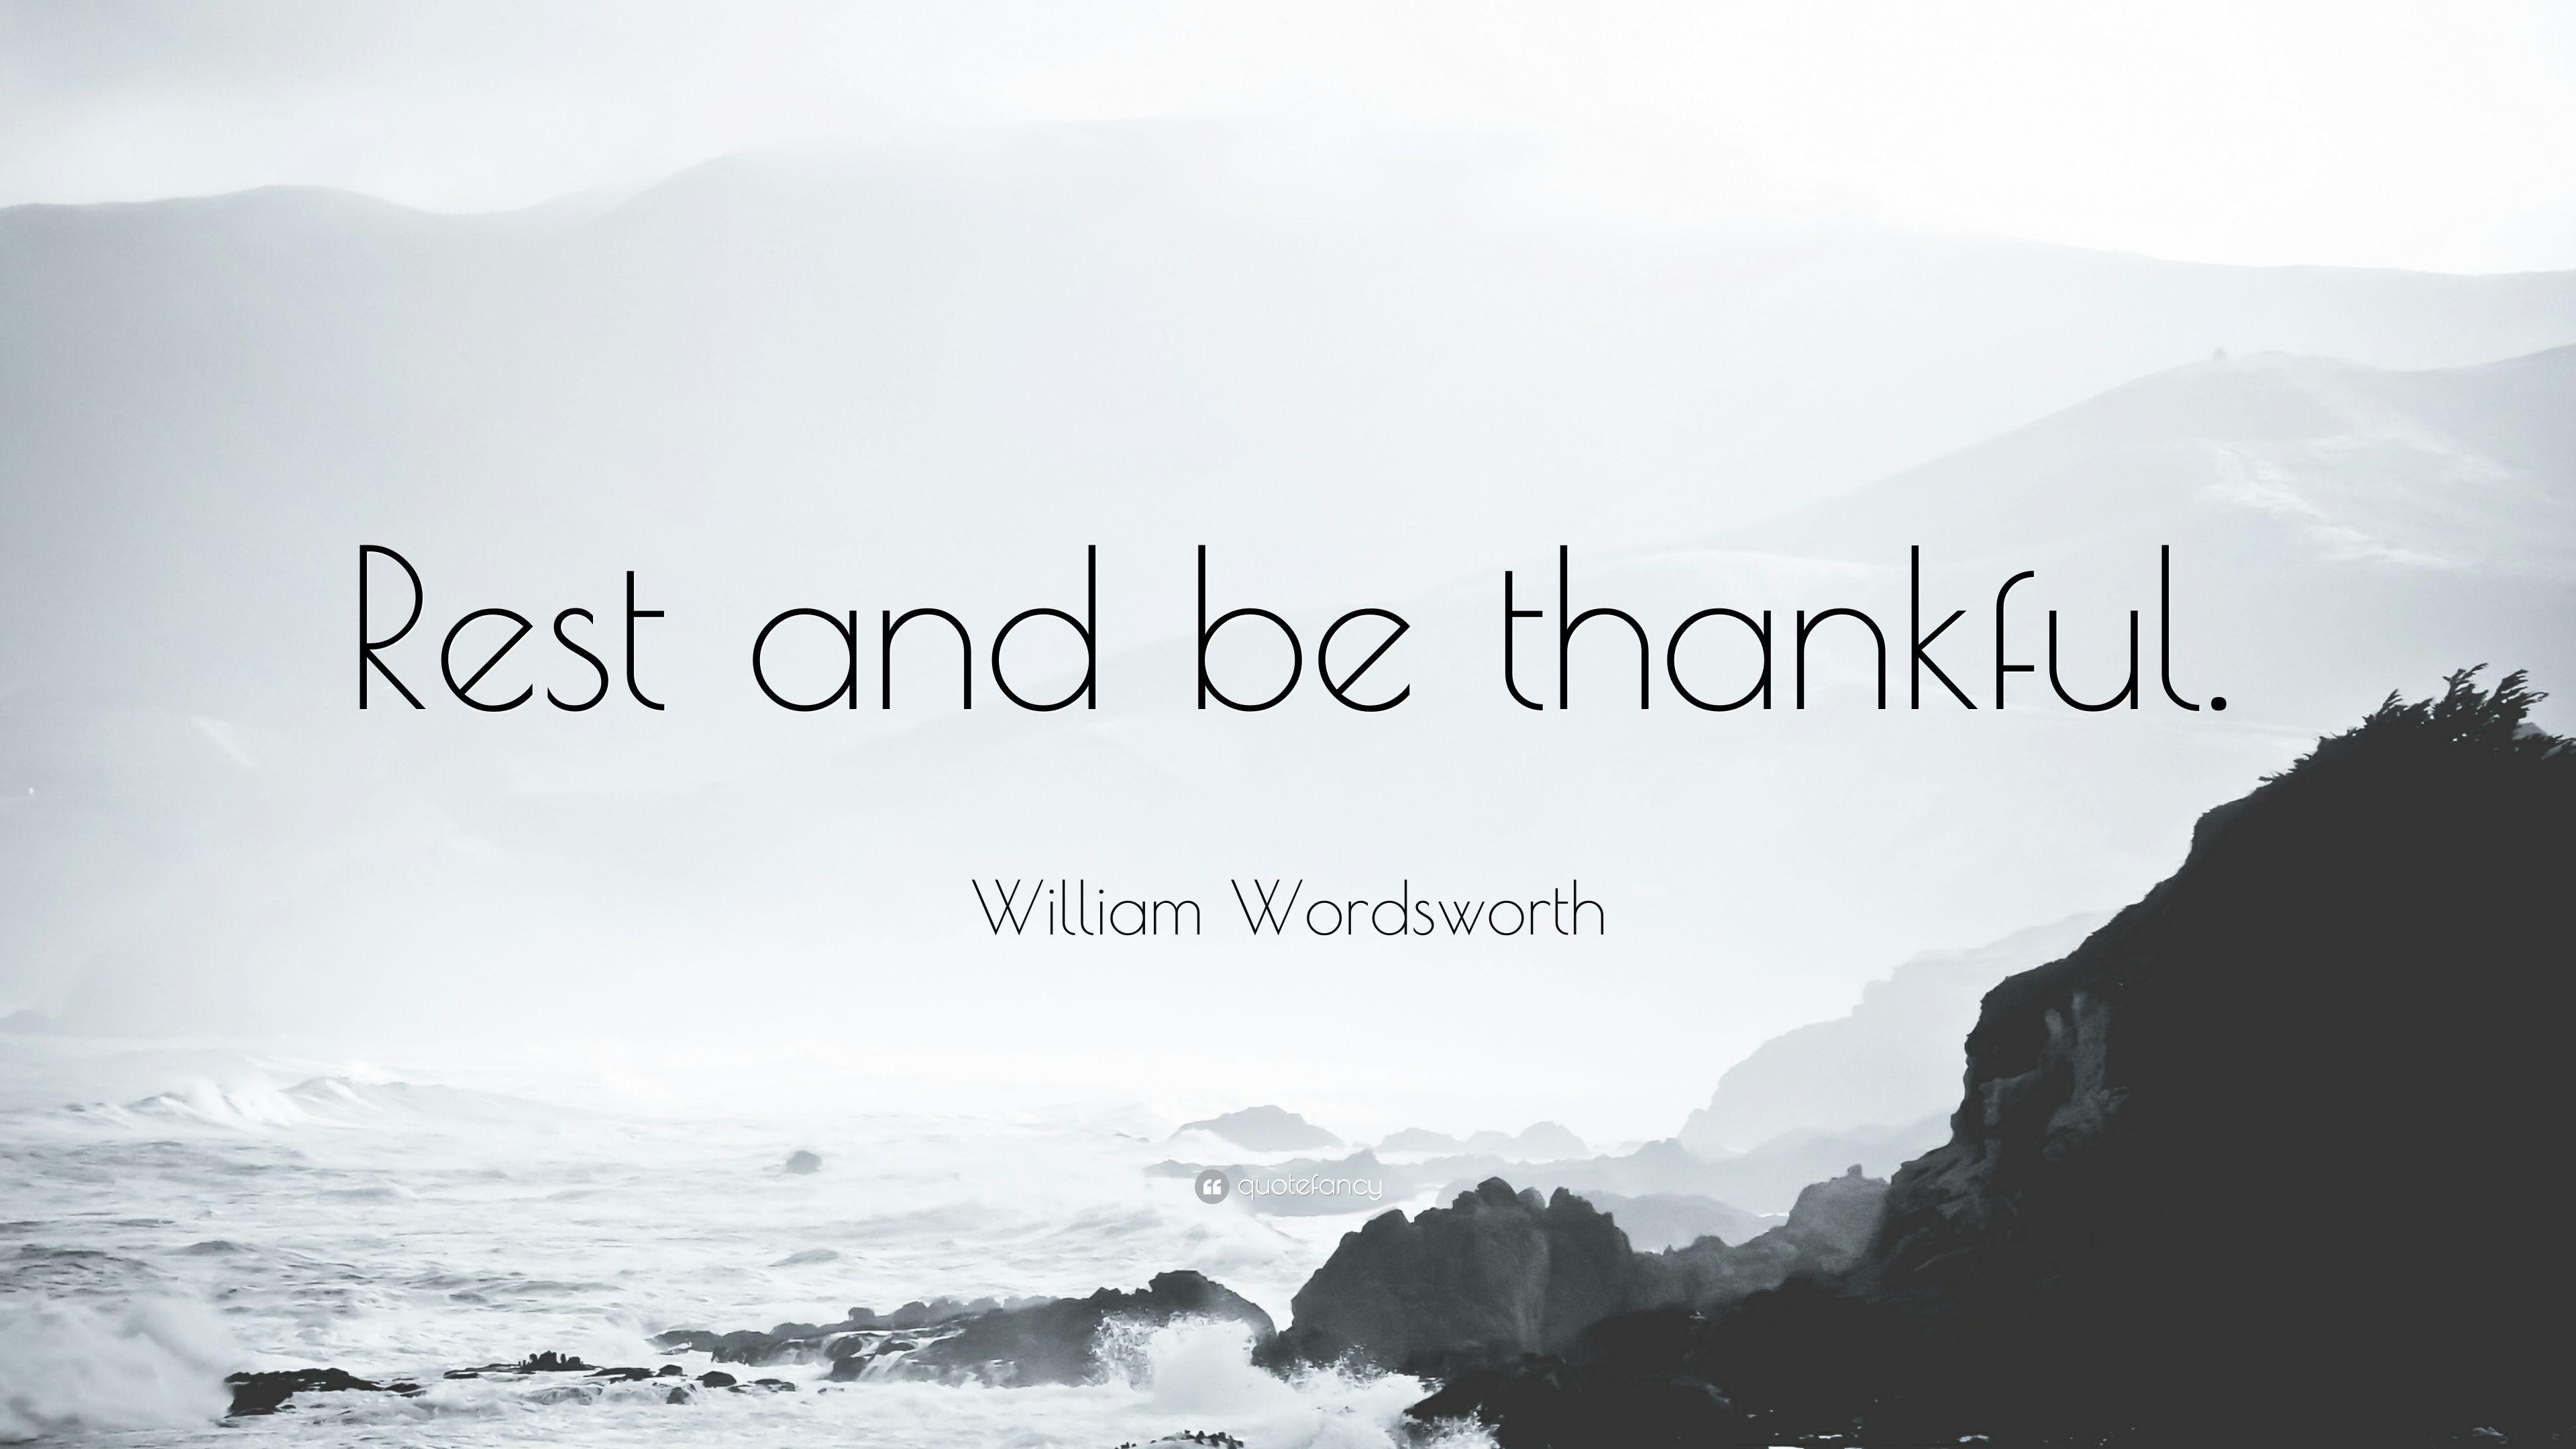 William Wordsworth Quote: “Rest and be thankful.” 12 wallpaper